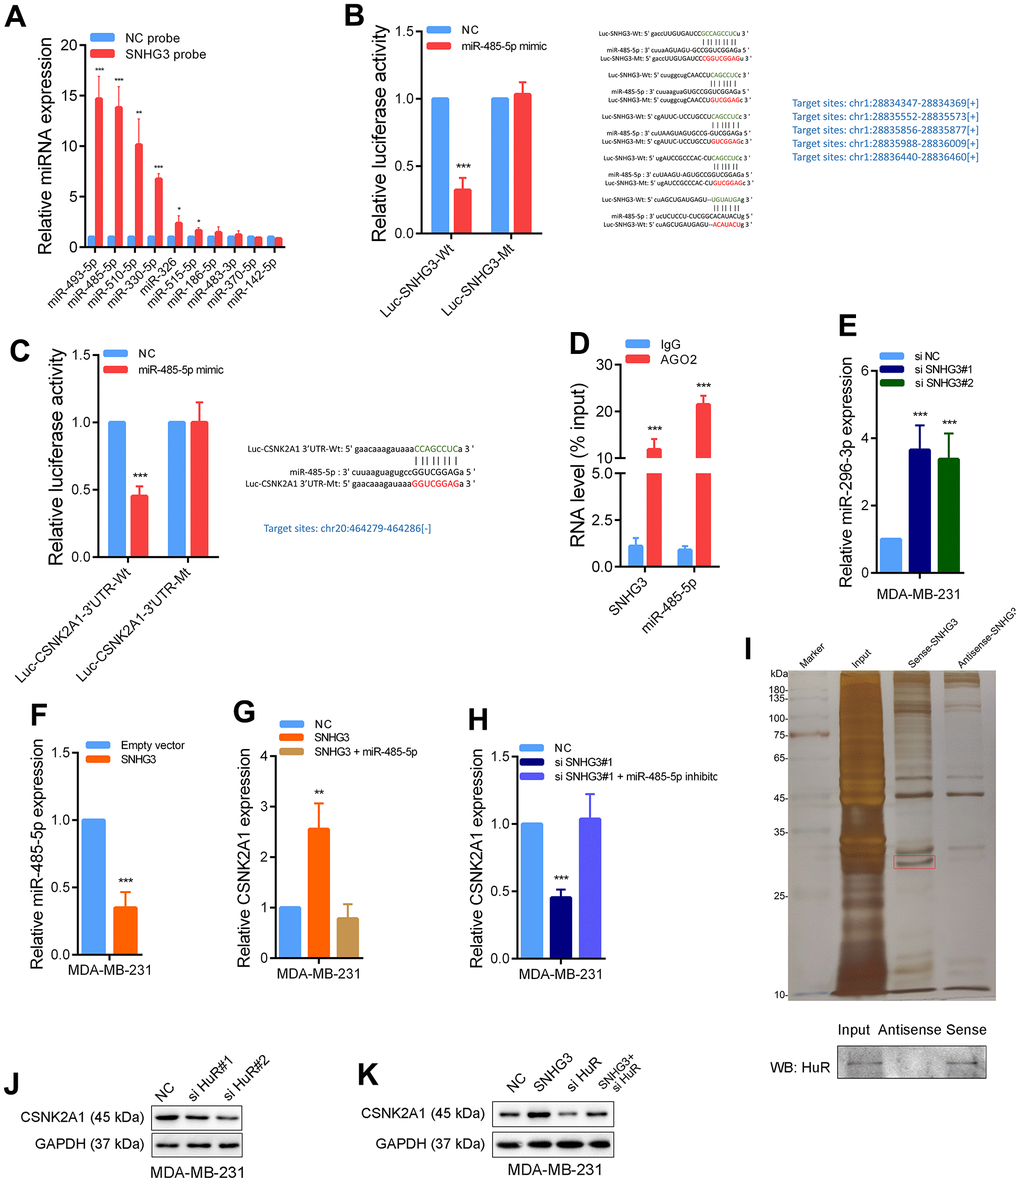 SNHG3 promotes CSNK2A1 expression through interaction of miR-485-5p and HuR protein. (A) The relative expression of candidate microRNAs which could potentially bind to SNHG3 were quantified by qRT-PCR after the biotinylated-SNHG3 pulldown assays in MDA-MB-231 cells. (B) Dual luciferase reporter assays were conducted with wild-type and mutant-type (putative binding sites for miR-485-5p were mutated) luciferase report vectors of SNHG3 and miR-485-5p. Right panel, sequence alignment of miR-485-5p and its predicted binding sites (green) of SNHG3. Predicted microRNA target sequence (blue) in SNHG3 (Luc-SNHG3-wt) and positions of mutated nucleotides (red) in SNHG3 (Luc-SNHG3-mt). (C) Dual luciferase reporter assays were conducted with wild-type and mutant-type (putative binding sites for miR-485-5p were mutated) luciferase report vectors of CSNK2A1 3’UTR and miR-485-5p. (D) RNA immunoprecipitation with an anti-Ago2 antibody was used to assess endogenous Ago2 binding to RNA, IgG was used as the control. The levels of SNHG3 and miR-485-5p were determined by qRT–PCR and presented as fold enrichment in Ago2 relative to input. (E, F) MiR-485-5p expression was detected by qRT-PCR after SNHG3 was silenced or overexpressed. (G, H) CSNK2A1 expression was detected by qRT-PCR in MDA-MB-231 cells with indicated treatment. (I) Representative image of silver-stained PAGE gels showing separated proteins that were pulled down using biotin-labeled SNHG3. A red frame indicates HuR. (J, K) CSNK2A1 expression was detected by western blot in MDA-MB-231 cells with indicated treatment.